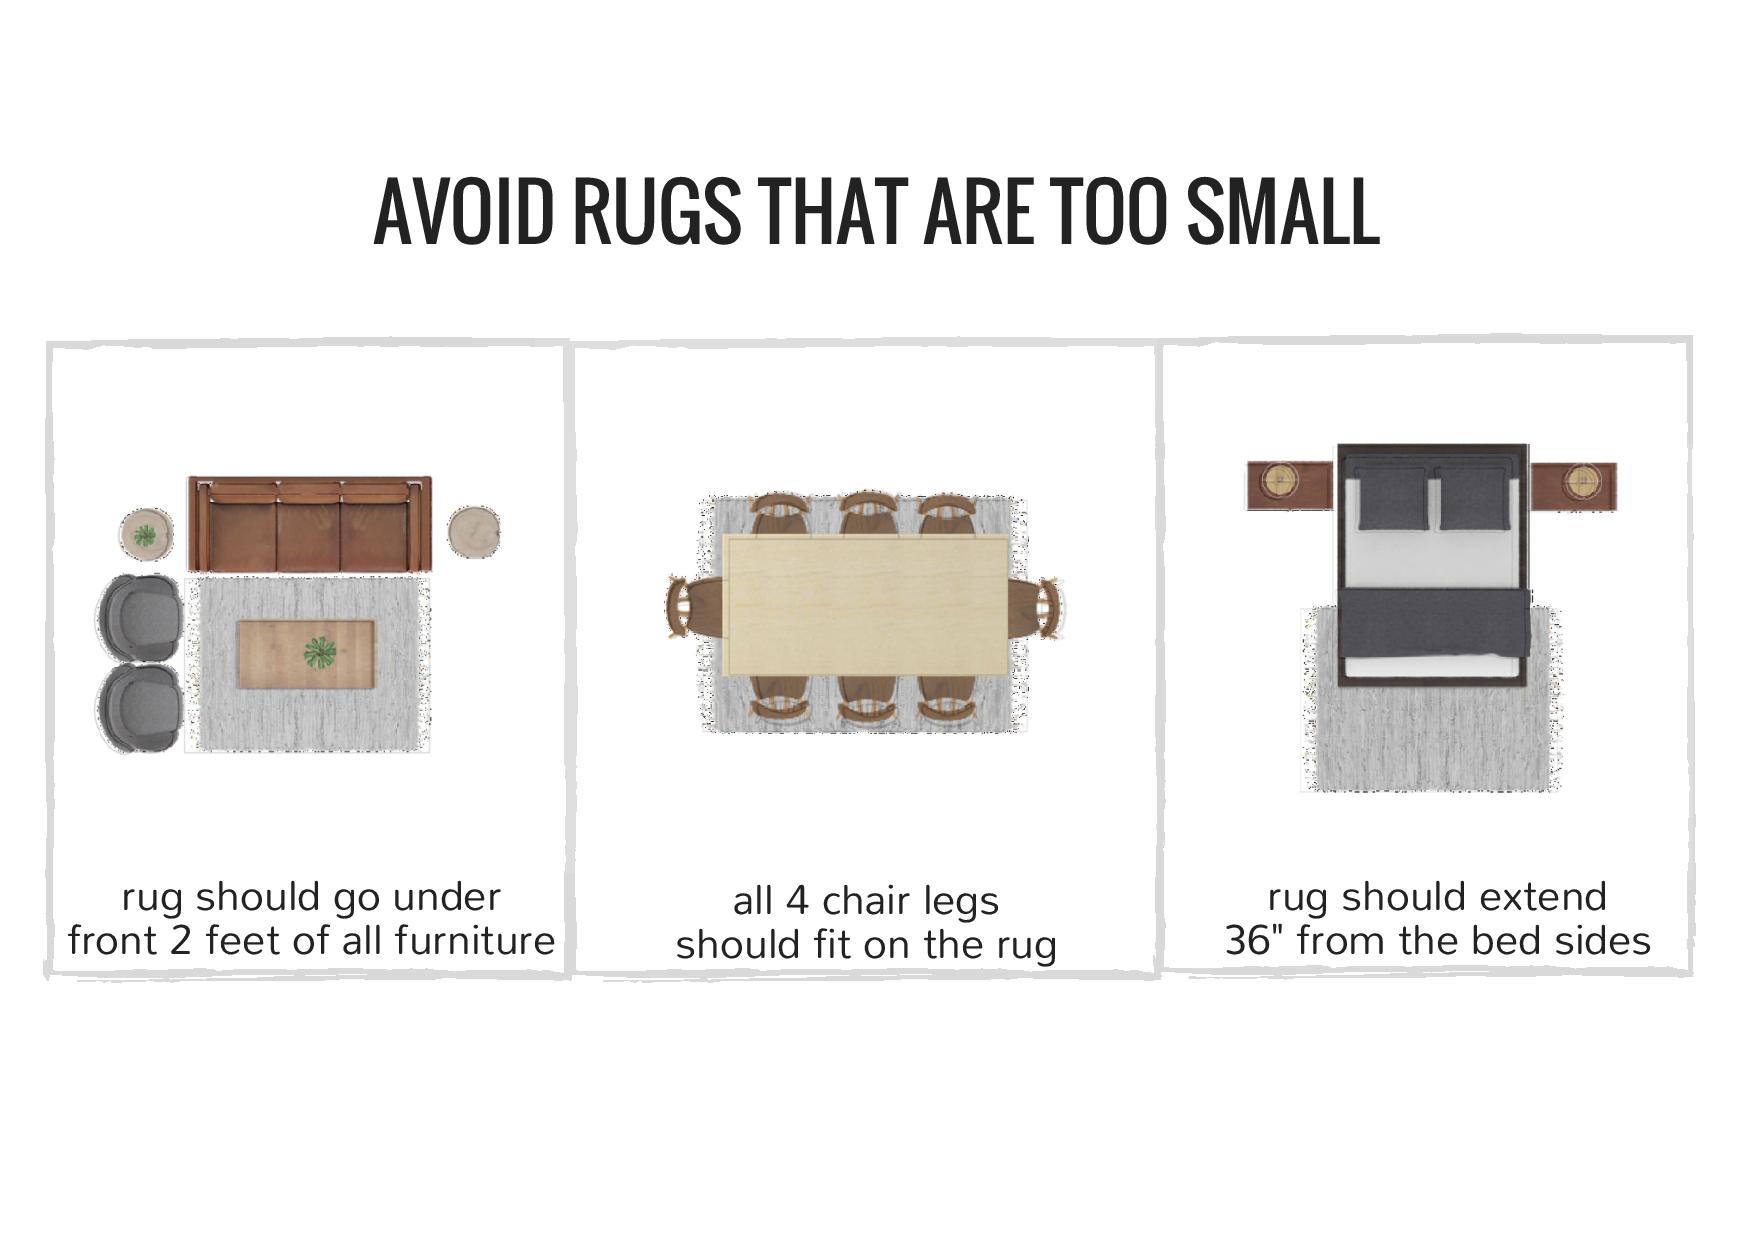 rug sizing and placement guide - common mistakes people make with rug size